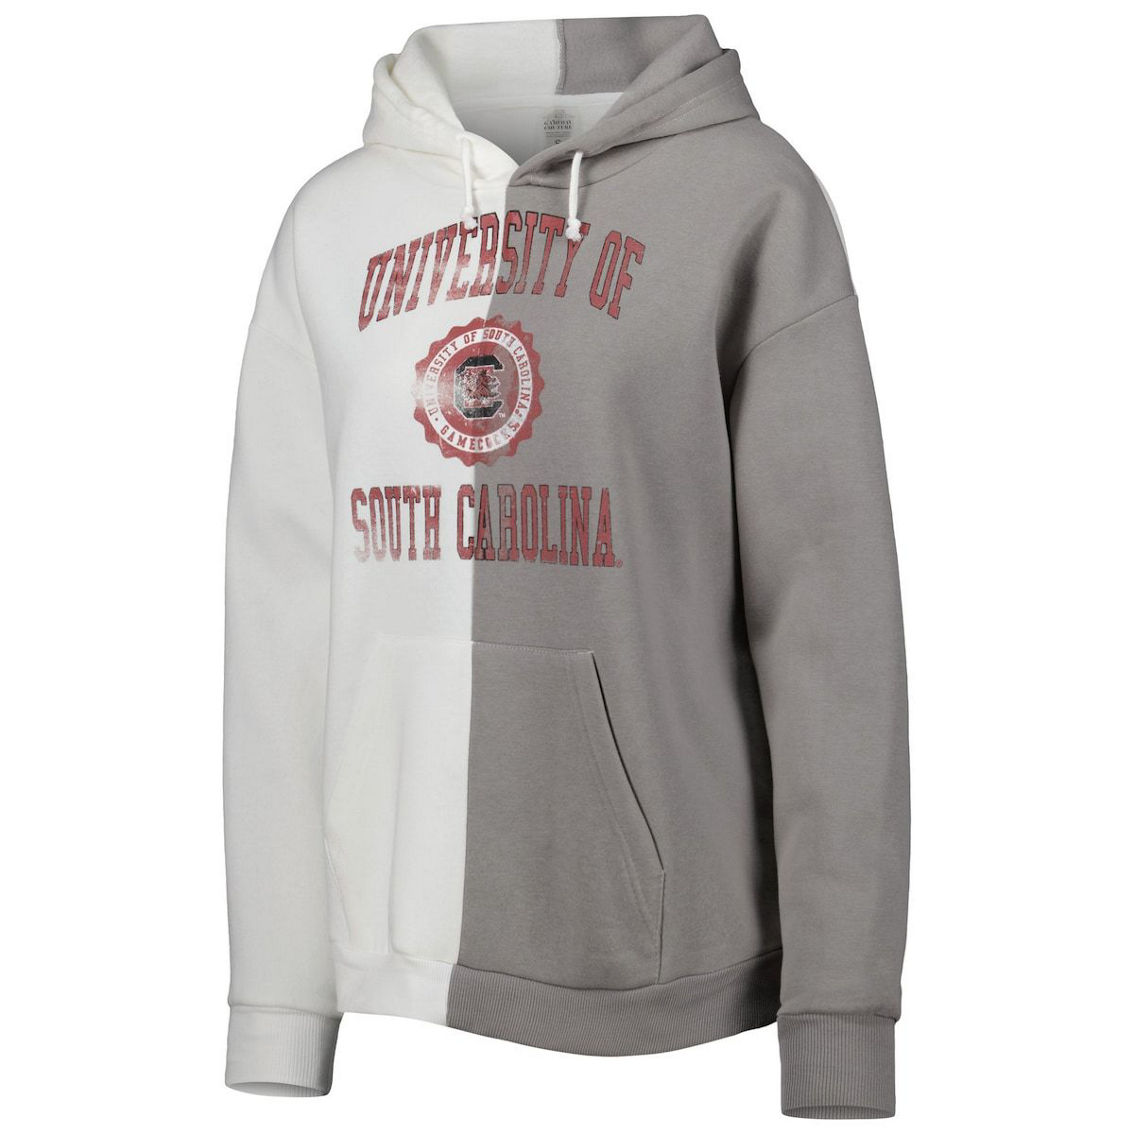 Gameday Couture Women's Gray/White South Carolina Gamecocks Split Pullover Hoodie - Image 3 of 4